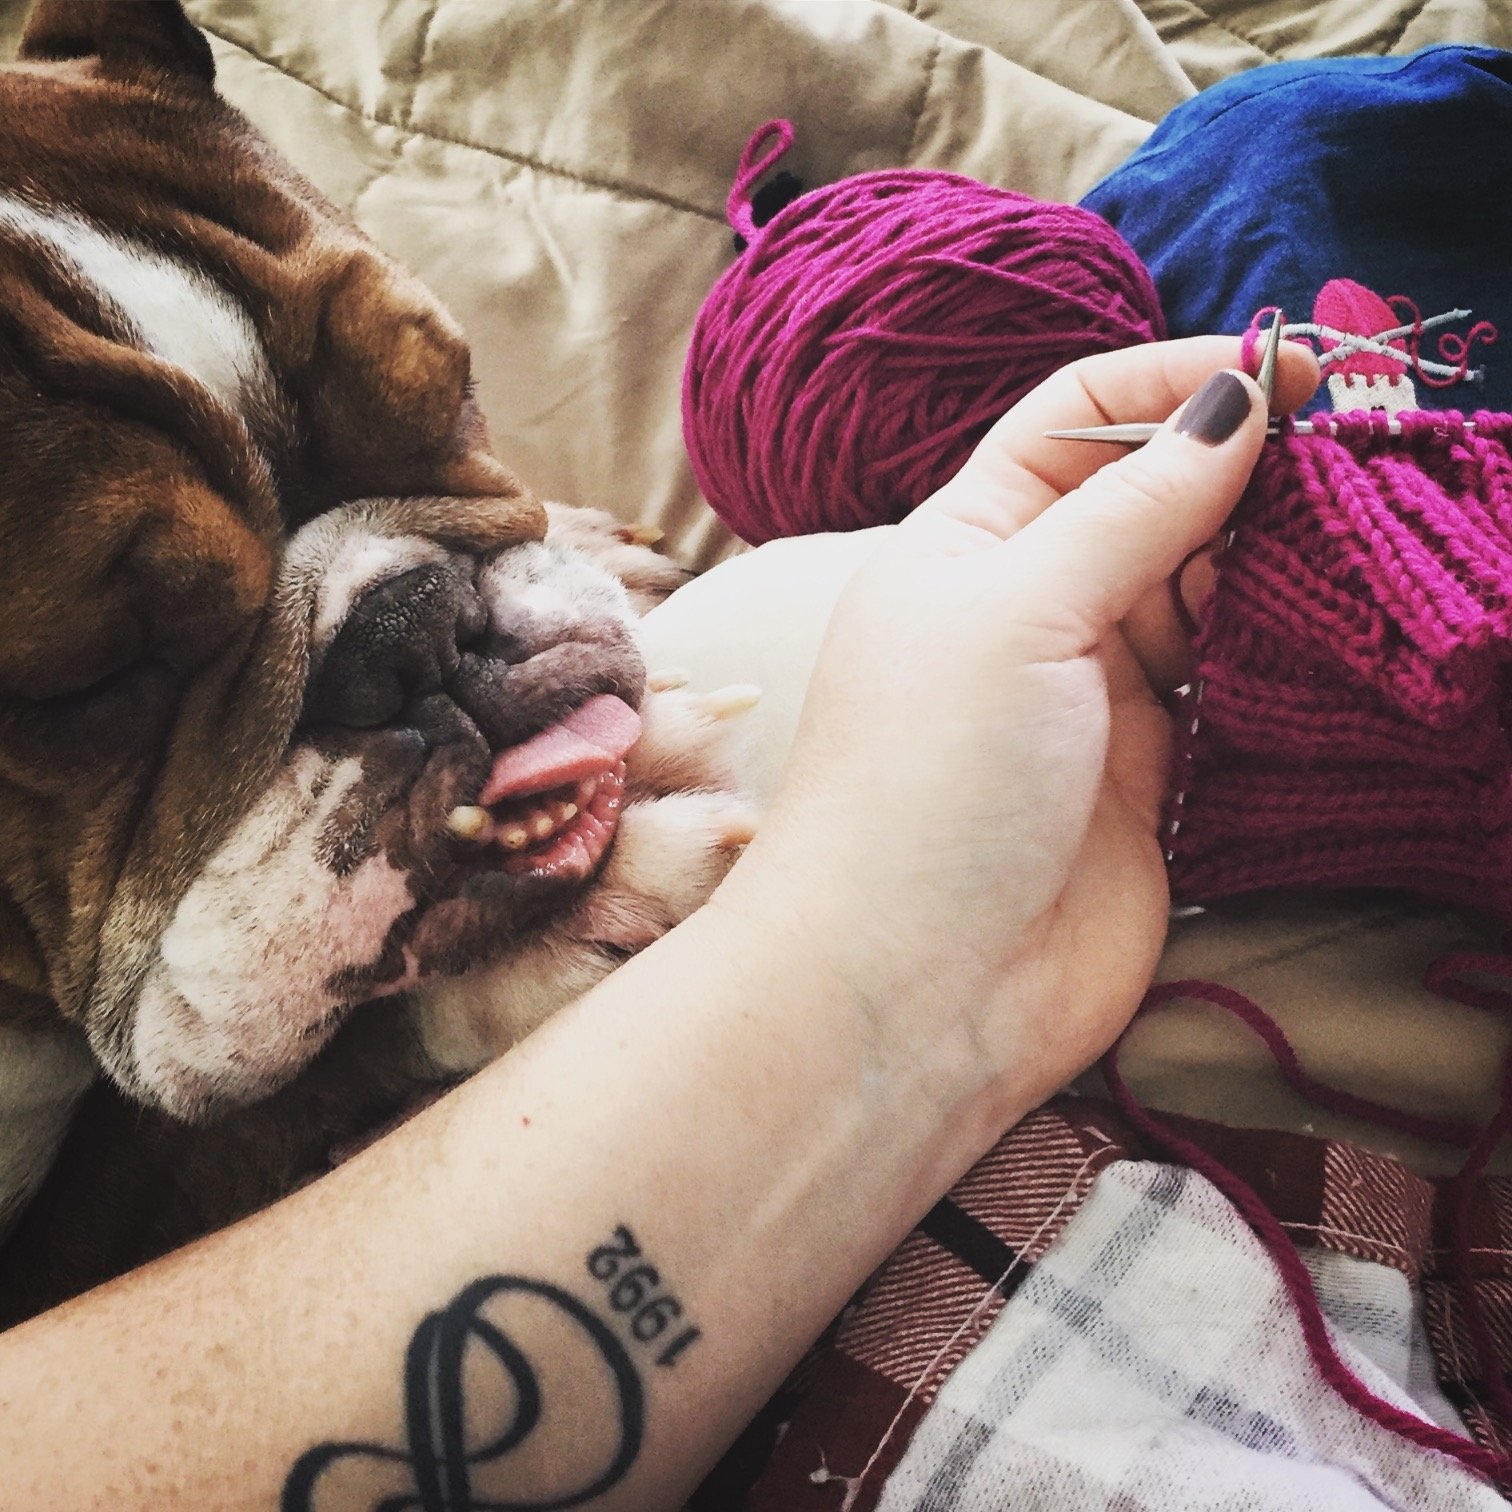 Knitting all the things.